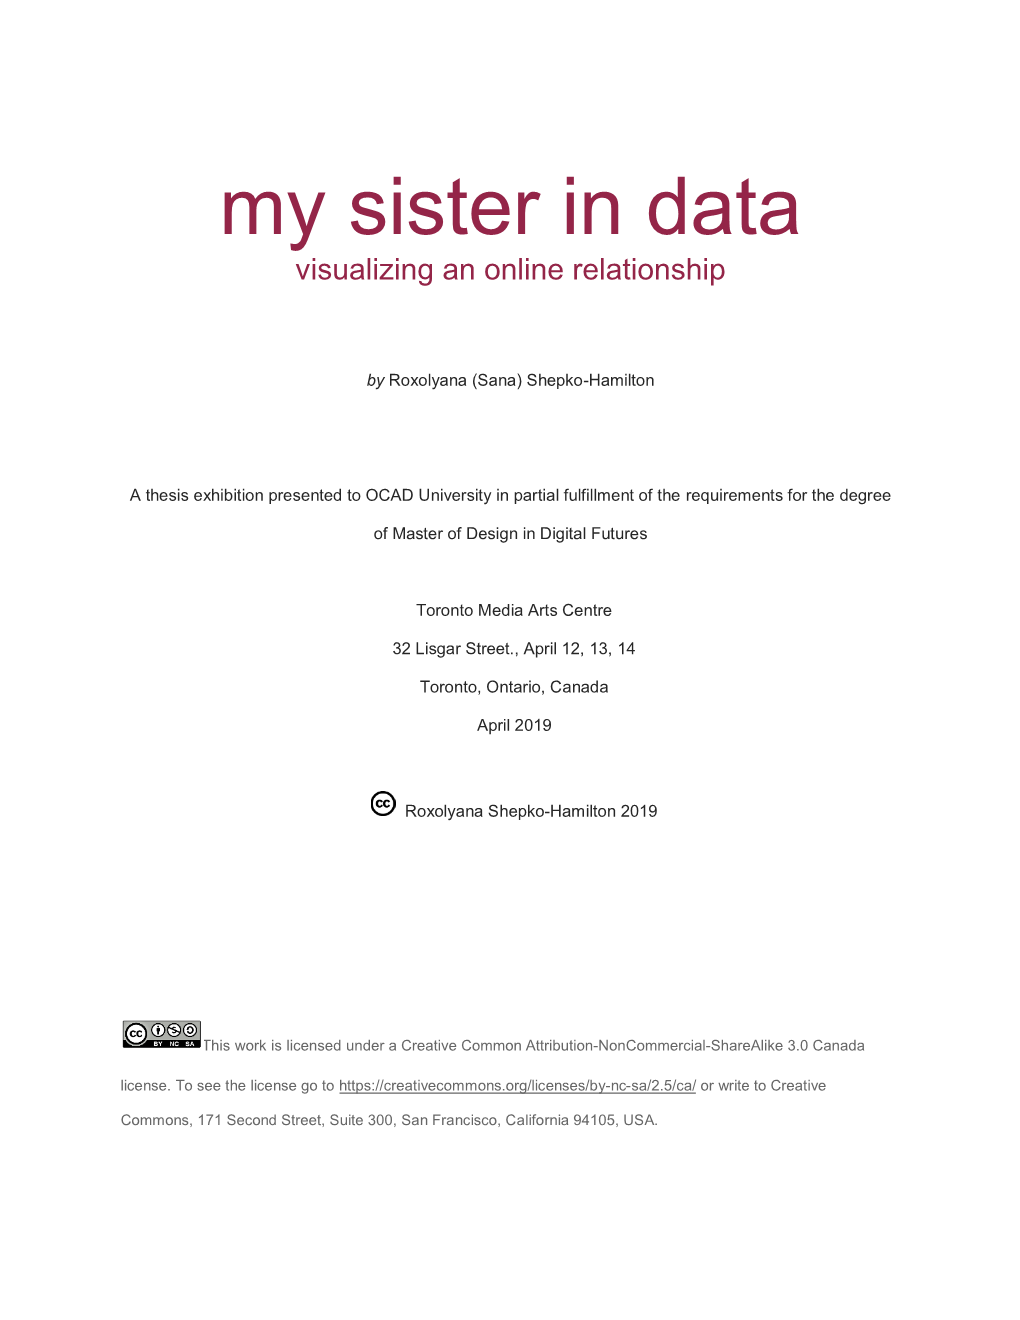 My Sister in Data: Visualizing an Online Relationship Master of Design in Digital Futures, 2019